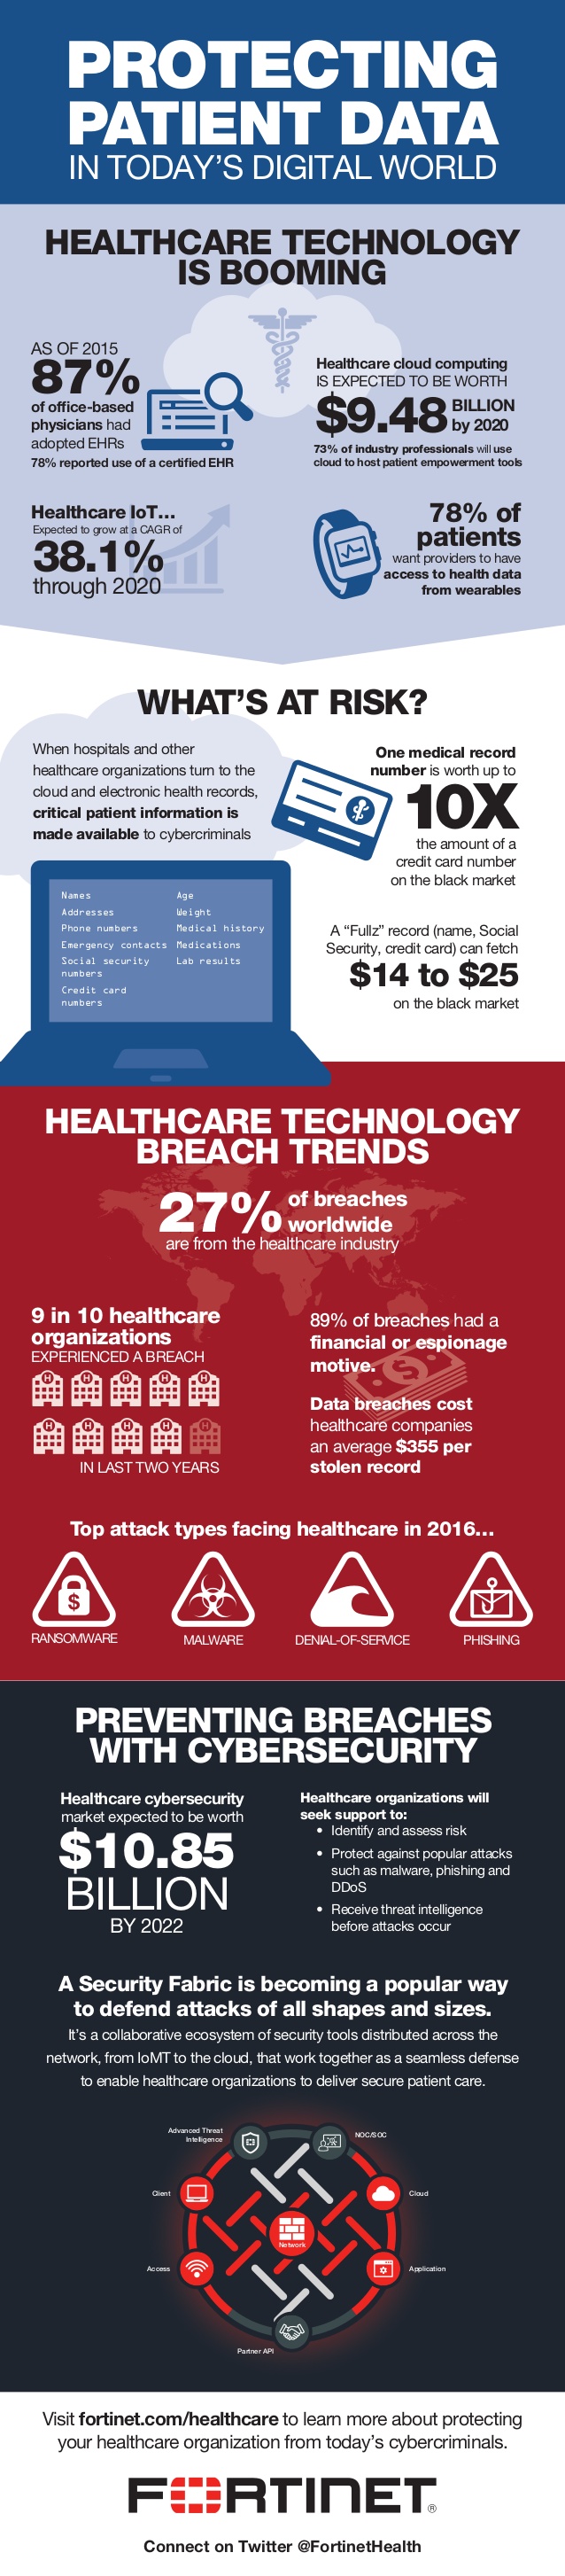 infographic-protecting-patient-data